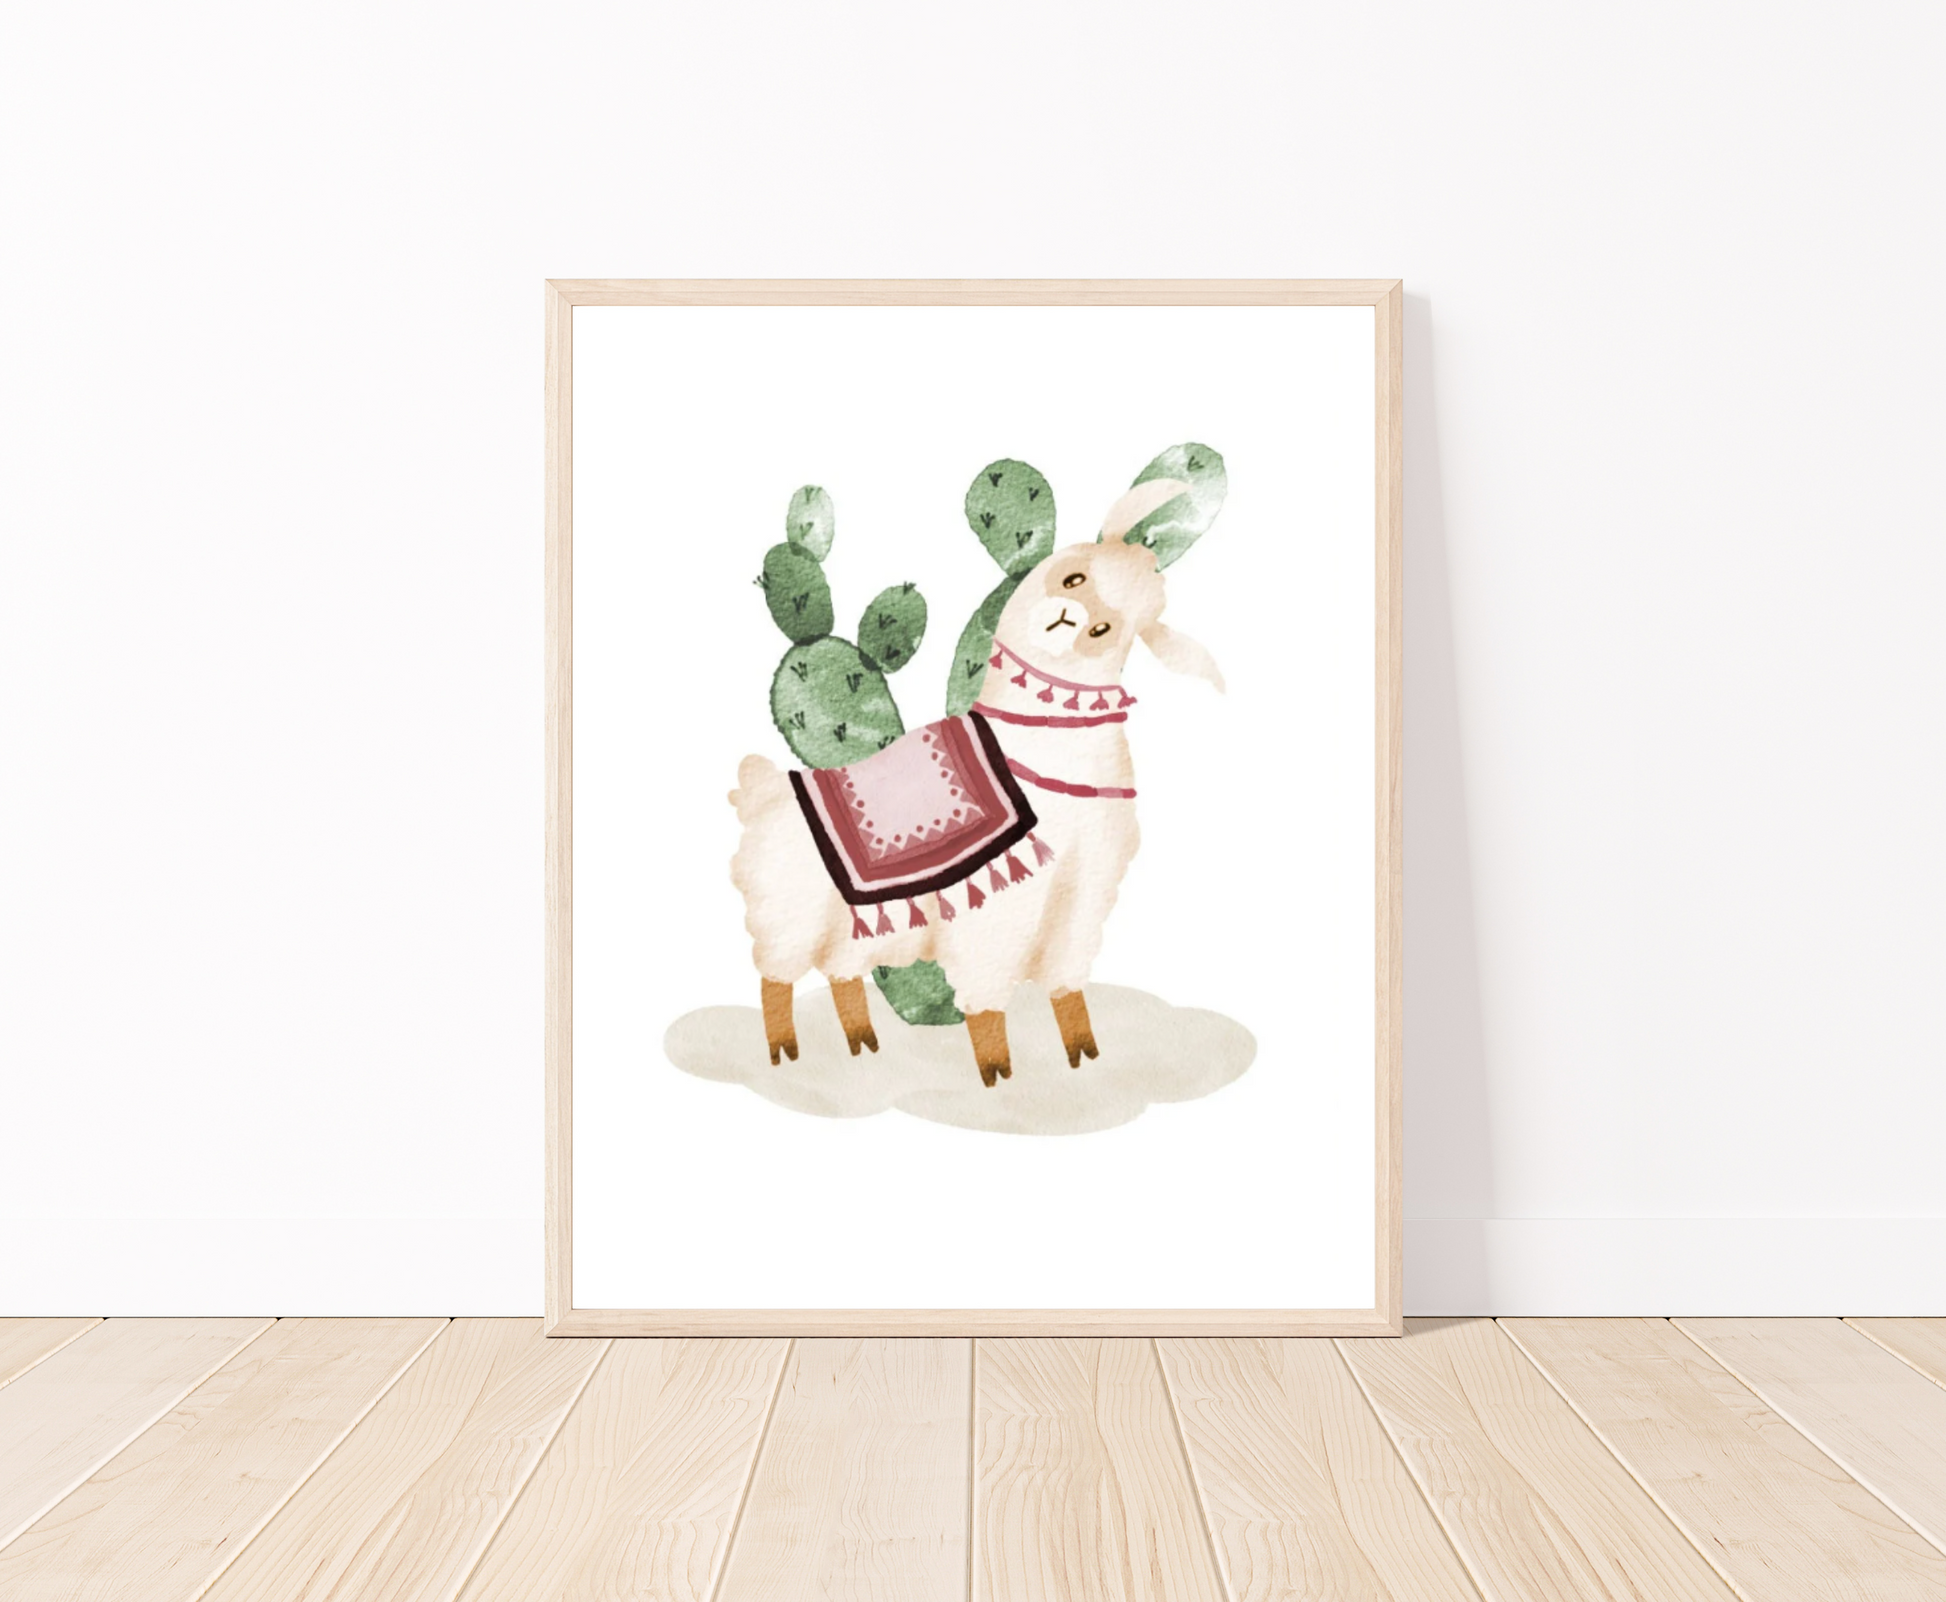 An image of a frame that shows an illustration of a cute lama wearing a red tapestry with a green cactus right behind it.